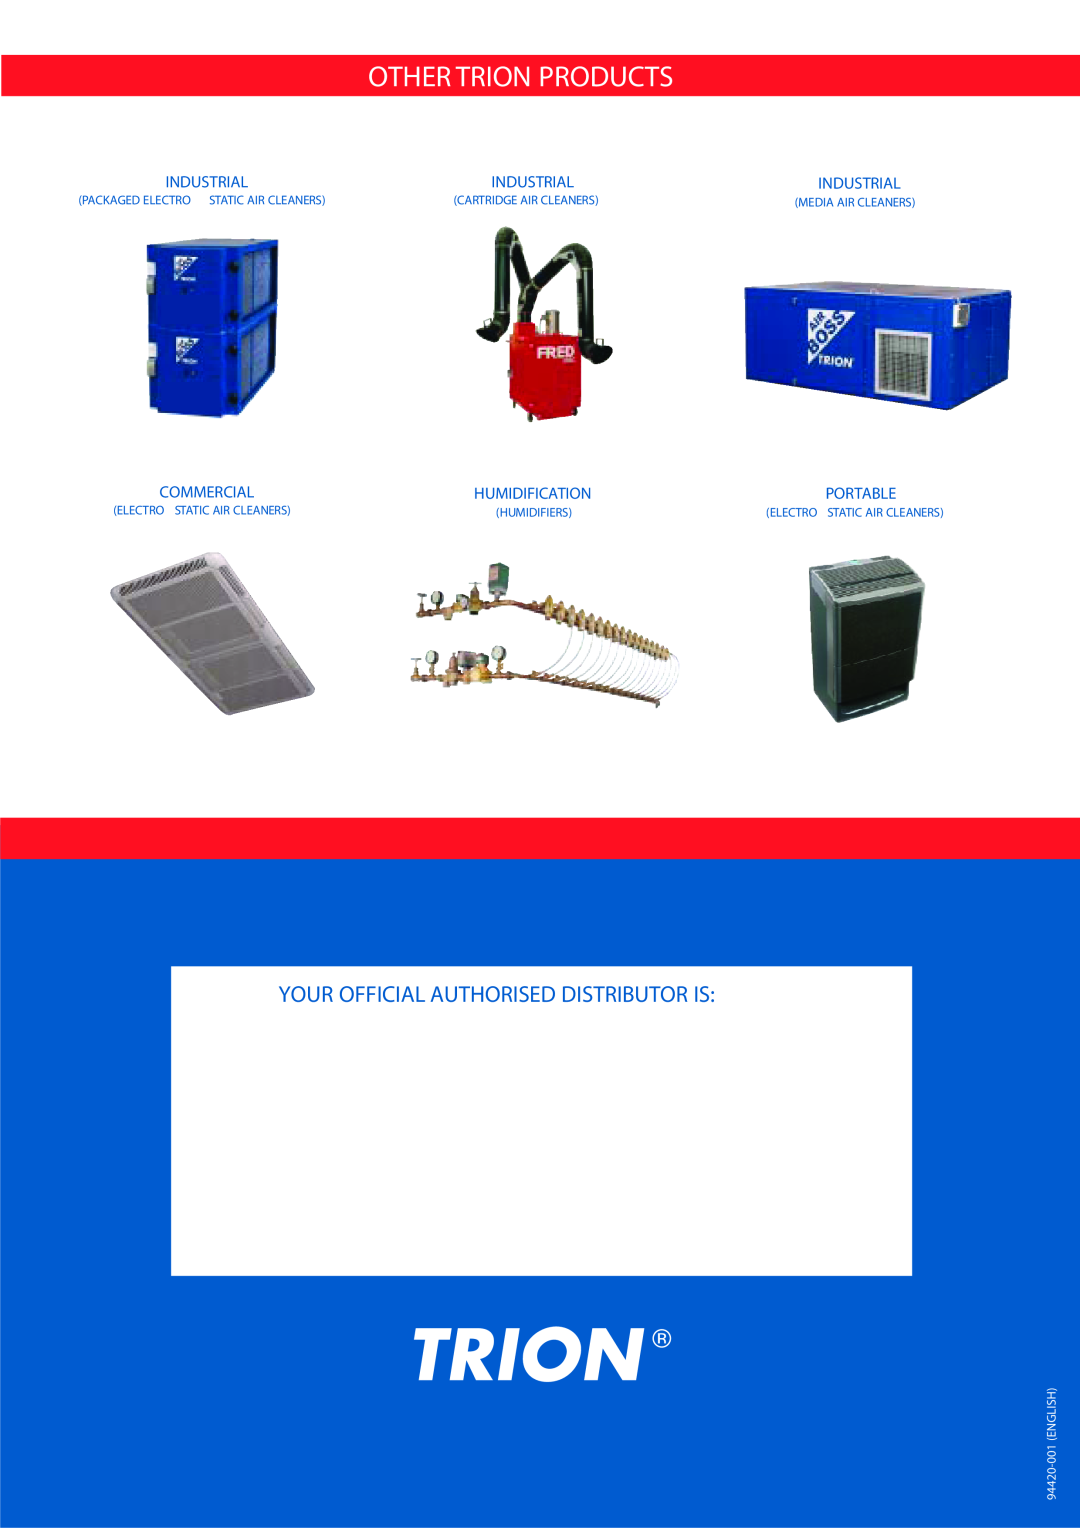 Trion CV Series, CM Series Other Trion Products, Your Official Authorised Distributor Is, Industrial, Commercial, Portable 